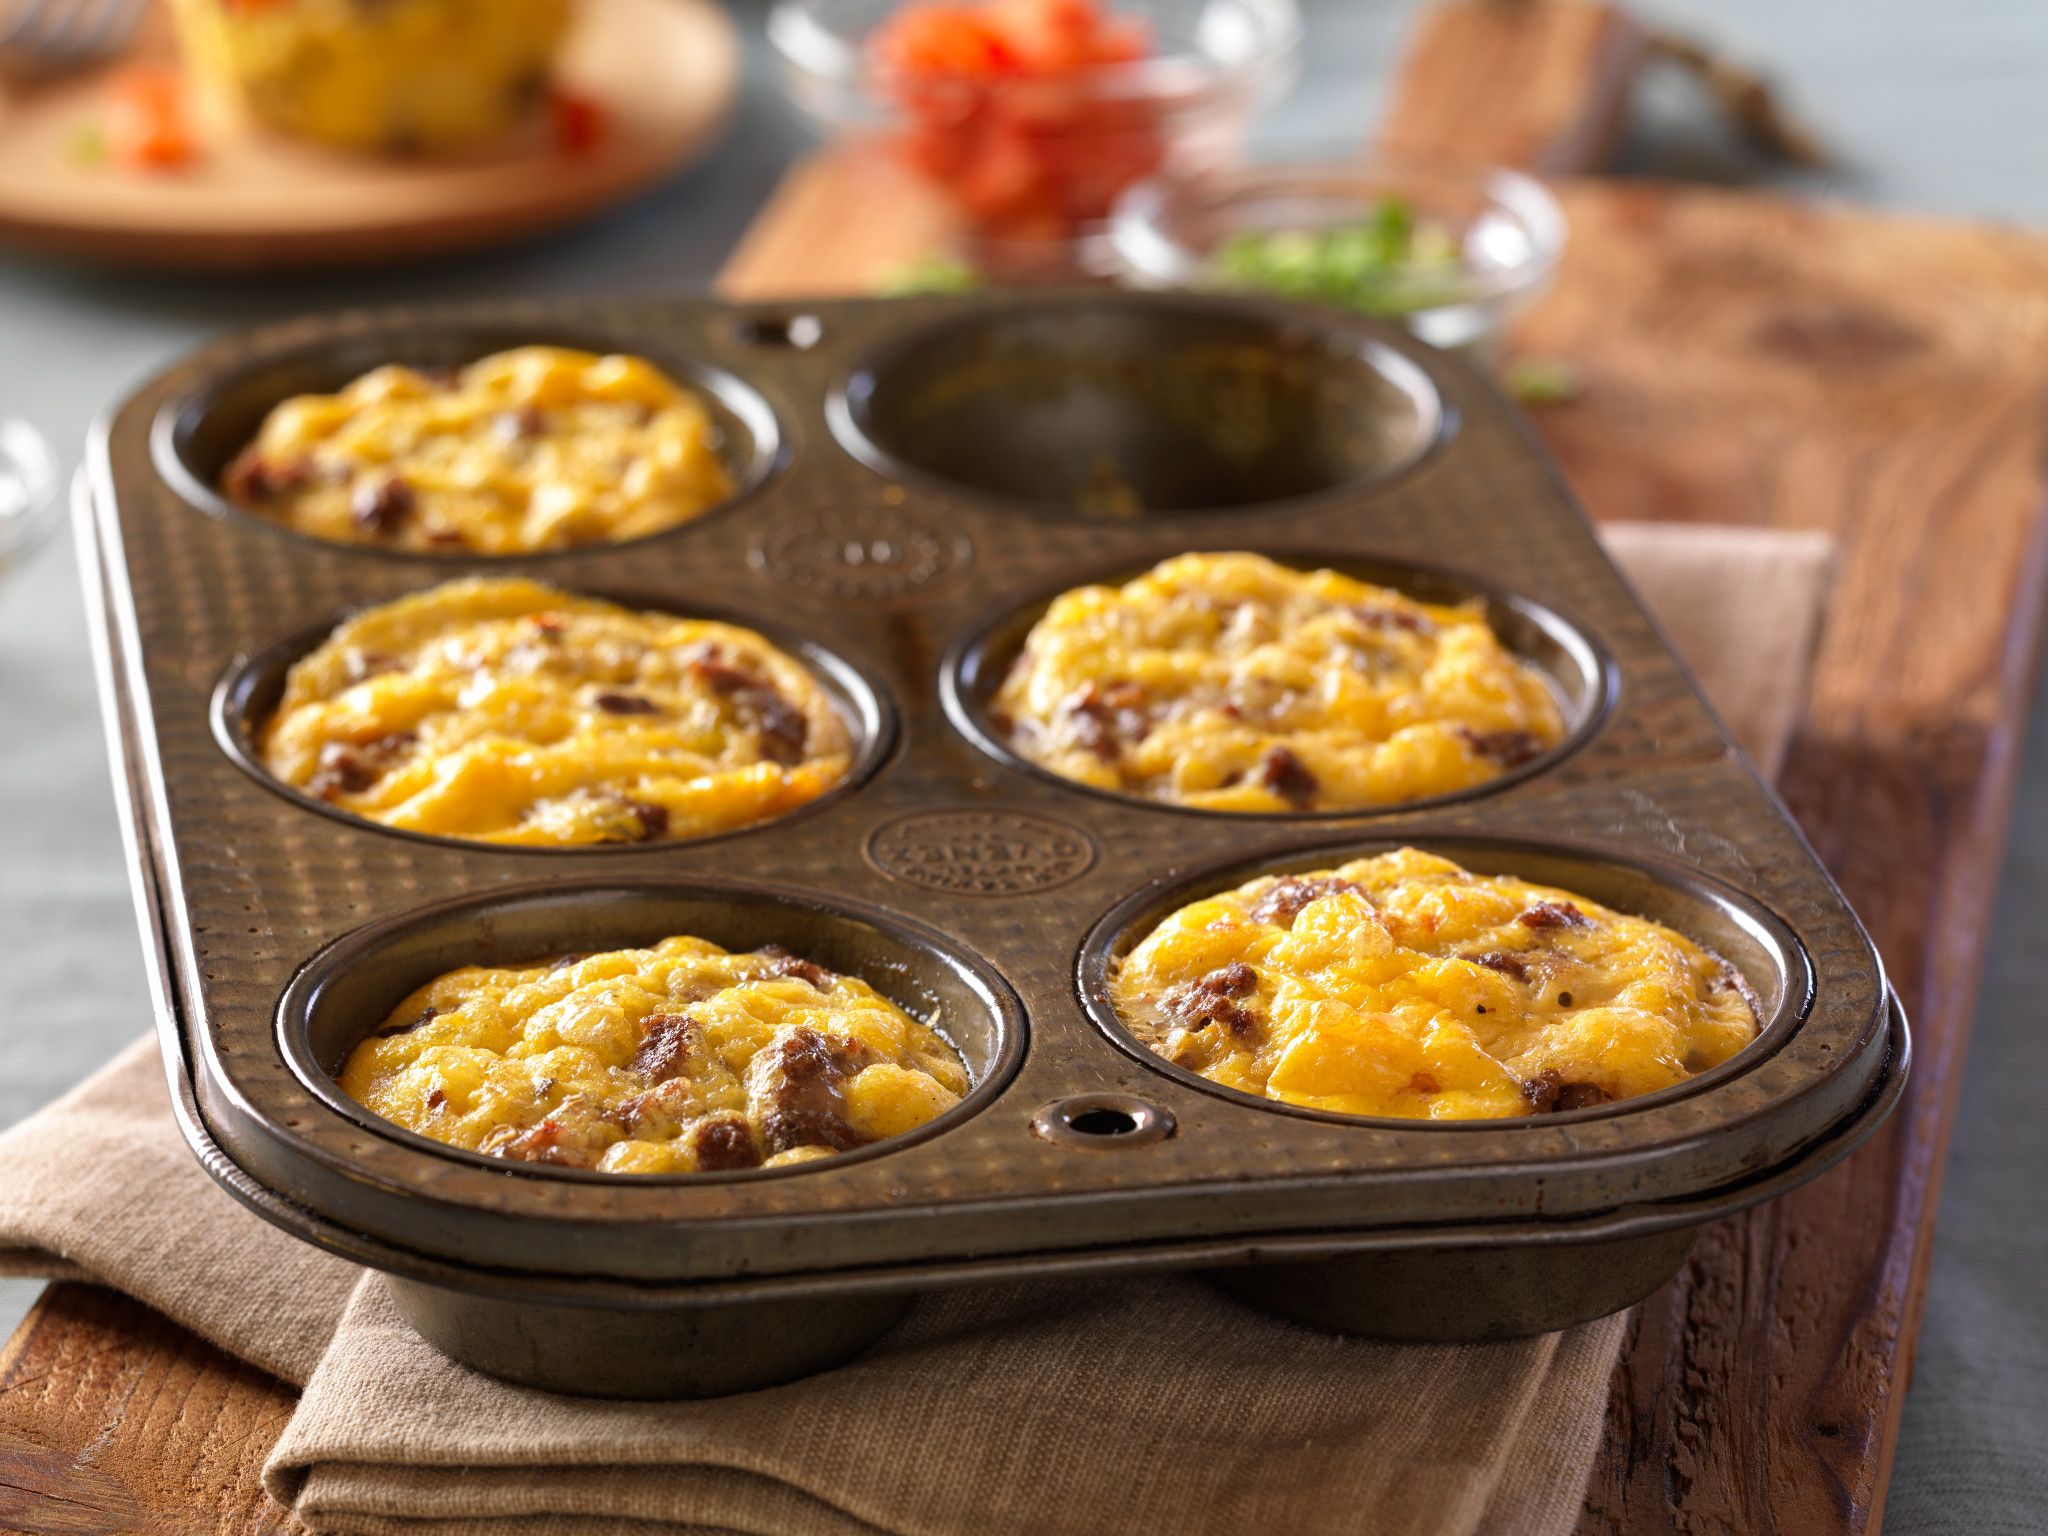 http://embed.widencdn.net/img/beef/8ygmt5flfs/exact/beef-sausage-egg-muffin-cups.tif?keep=c&u=7fueml